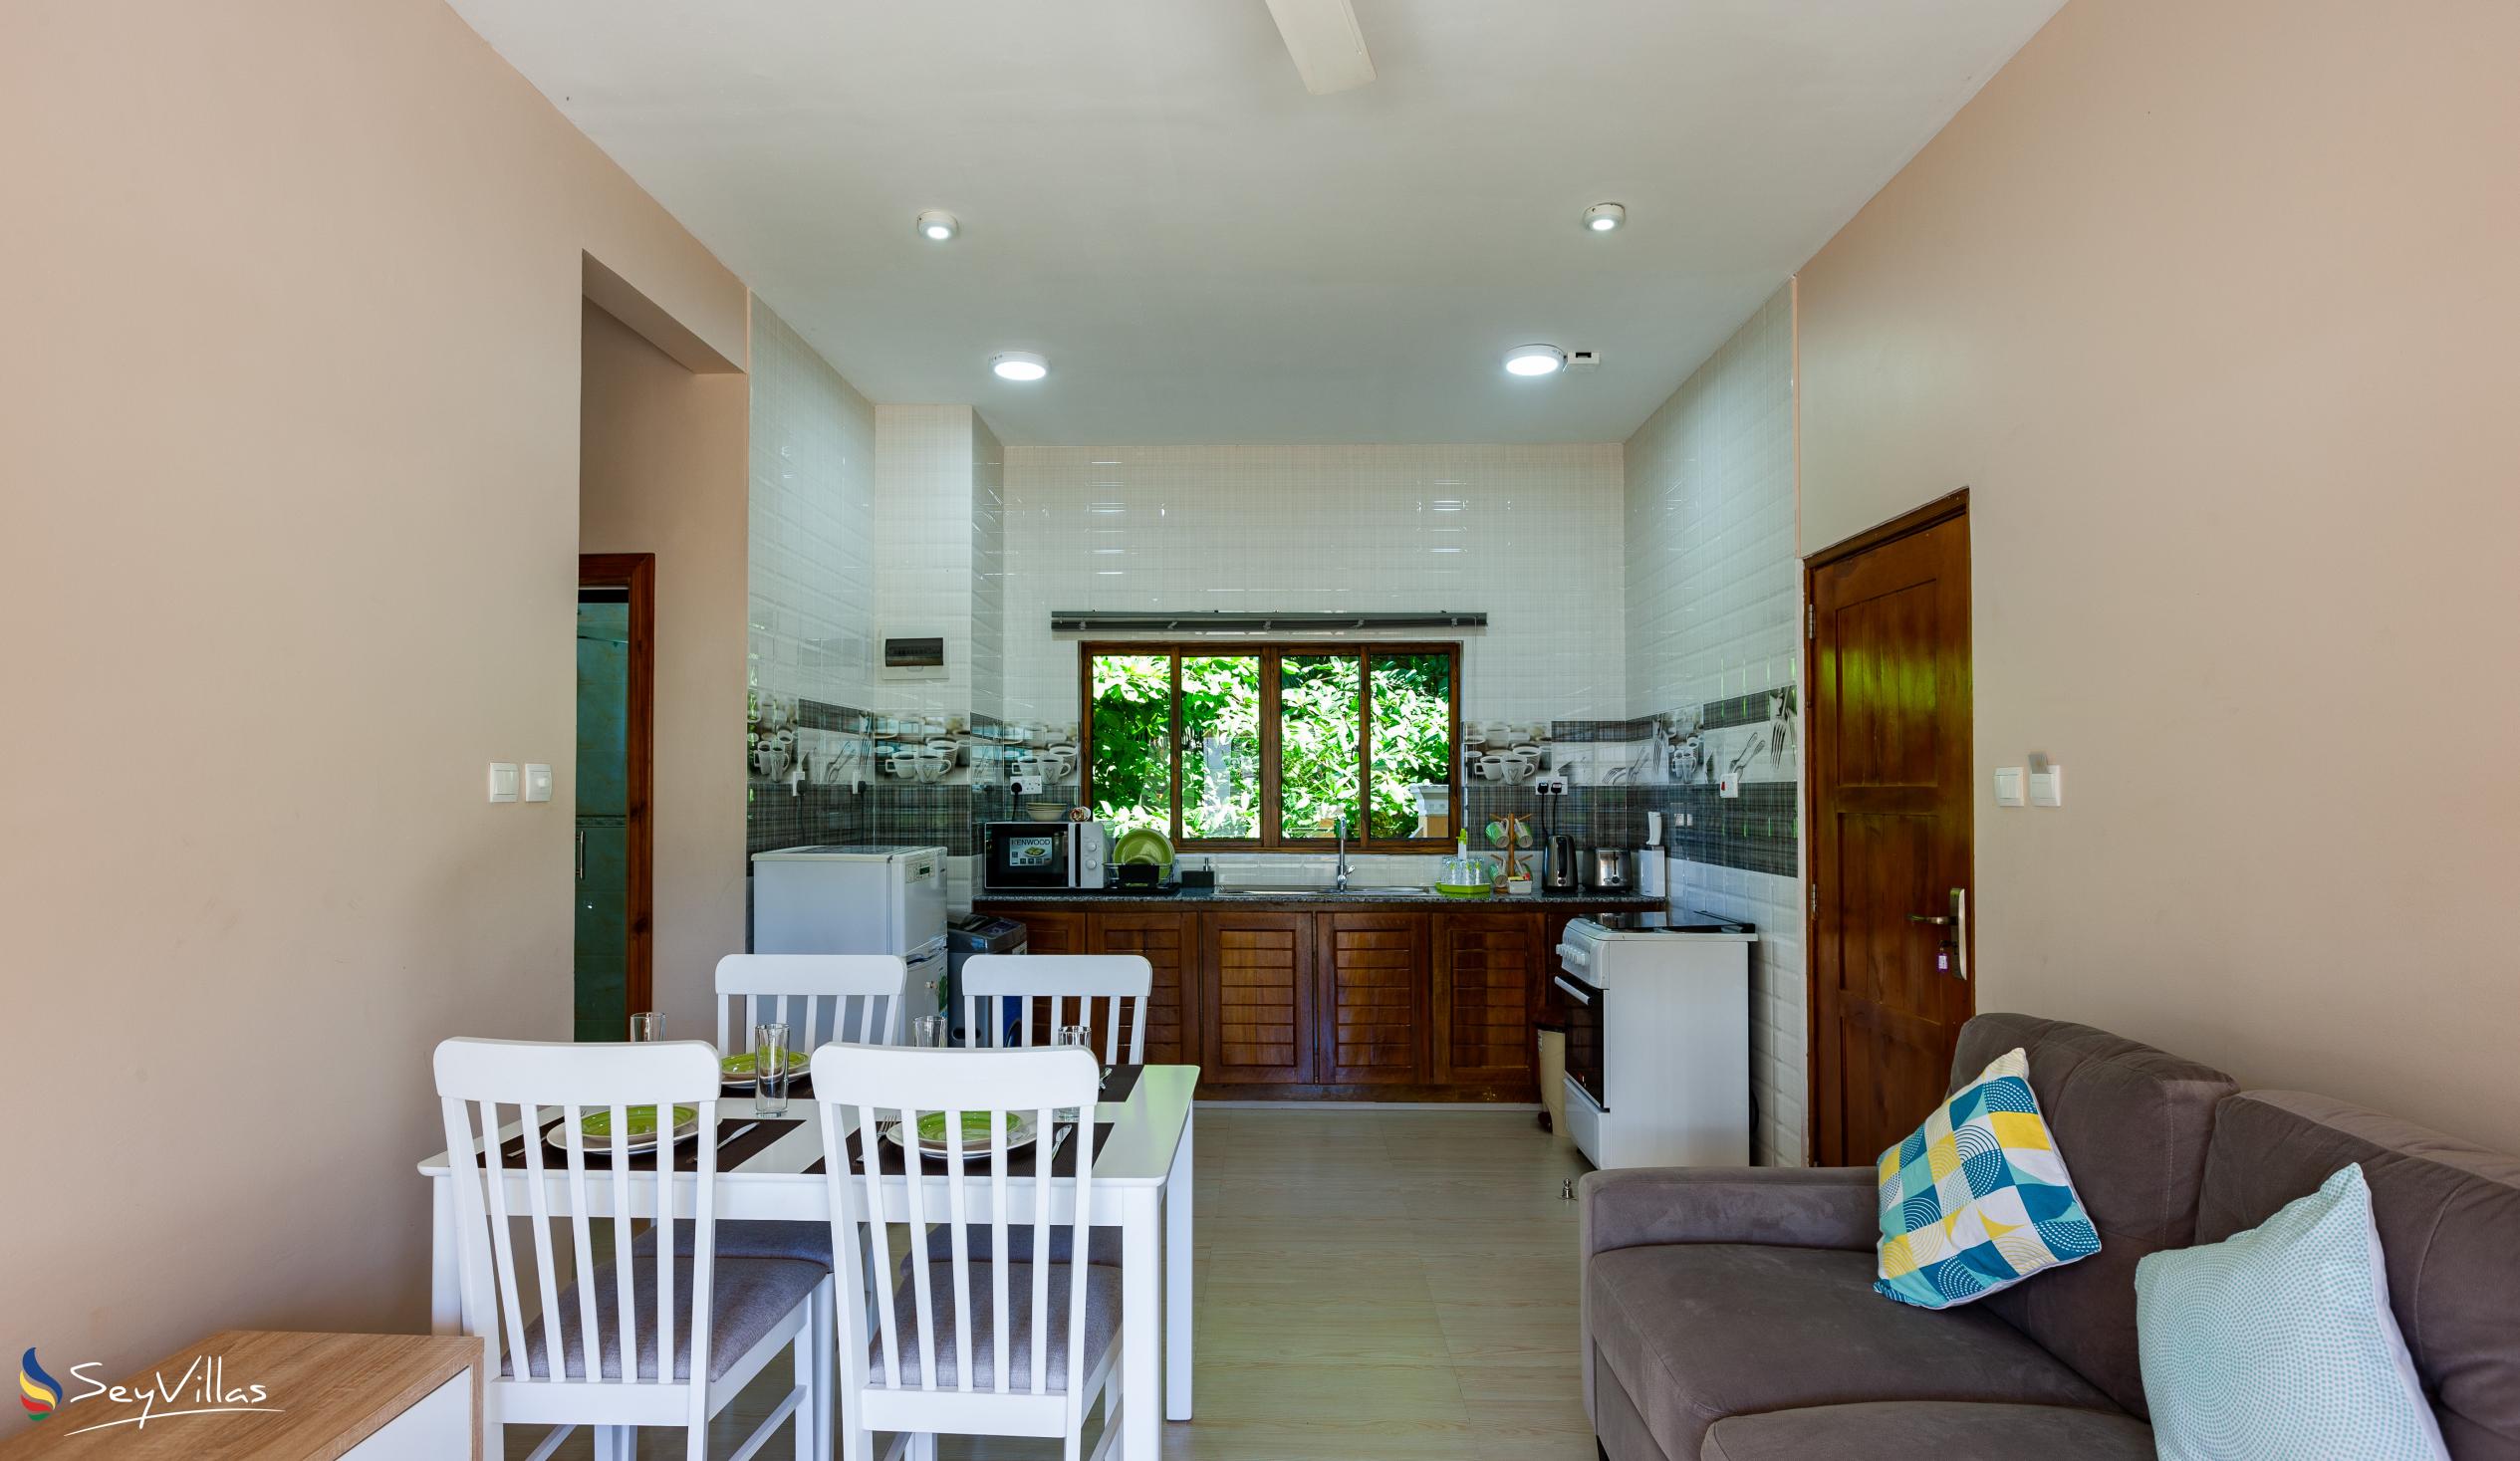 Foto 42: Stone Self Catering Apartments - Appartement 2 chambres - Praslin (Seychelles)